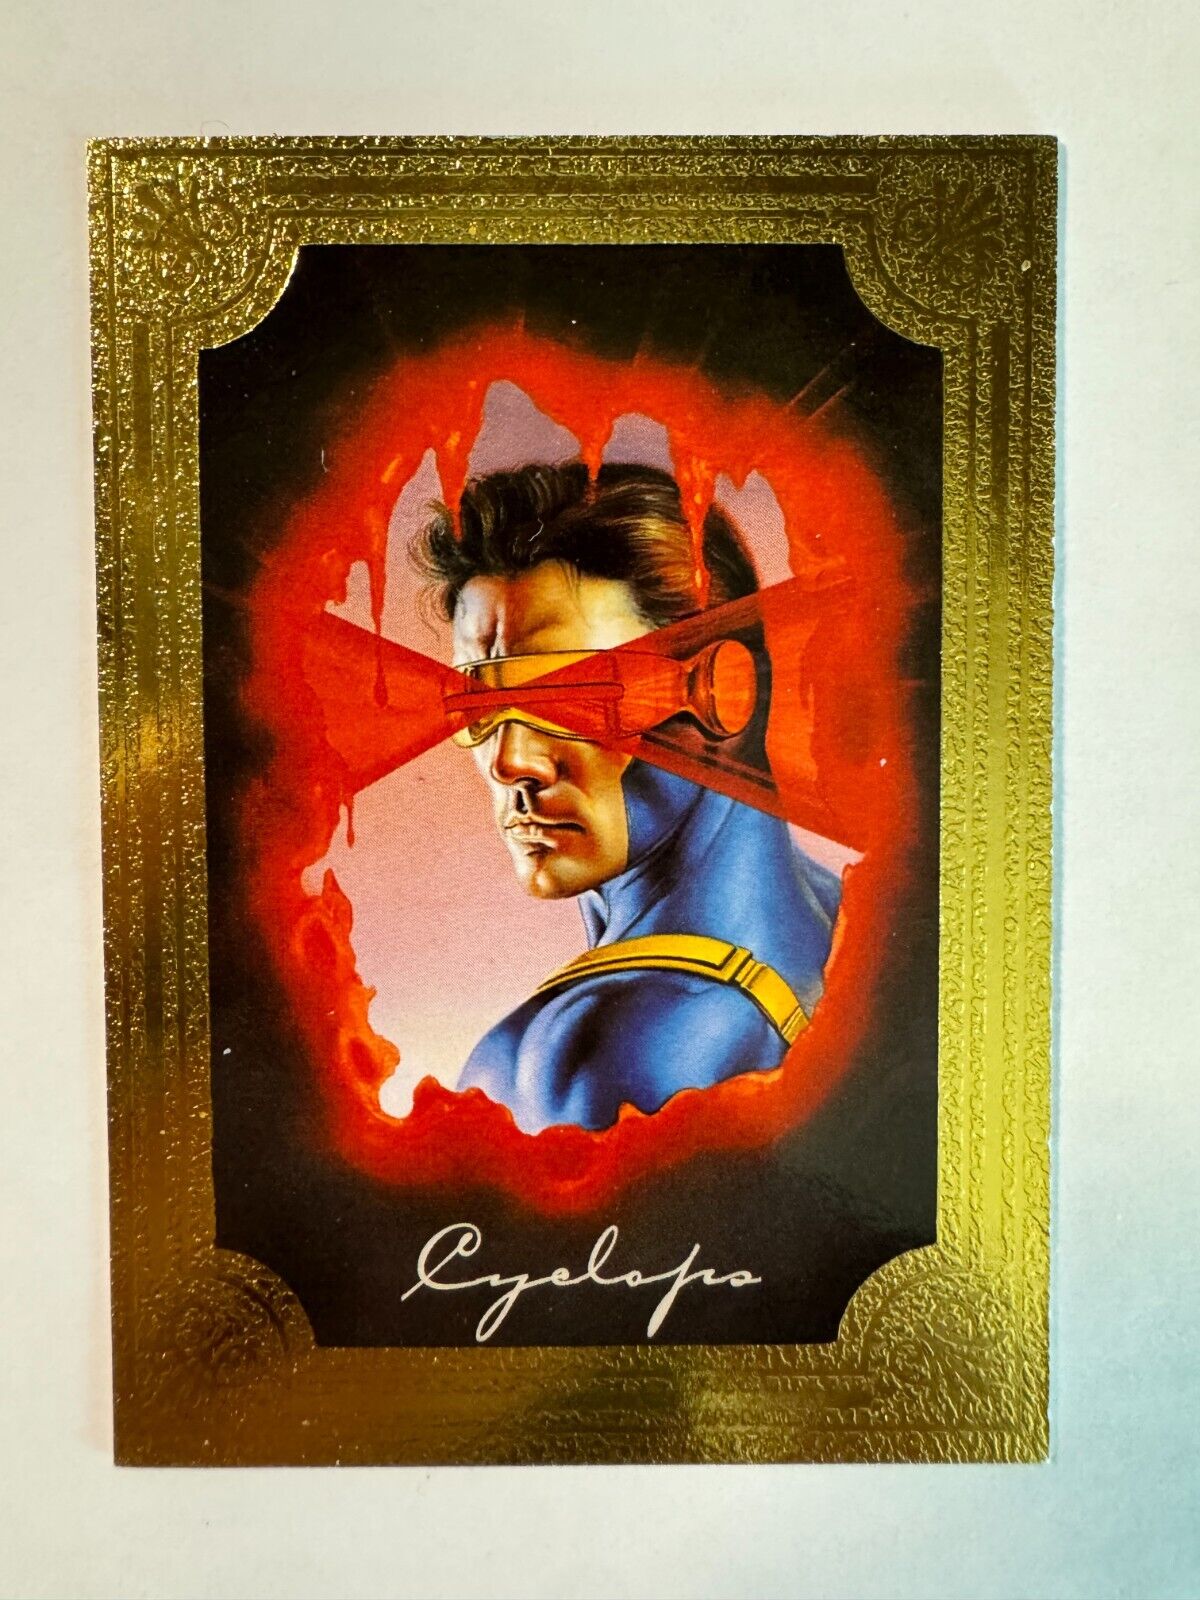 1996-97 Skybox Marvel Masterpieces Gold Gallery #1 of 6 card